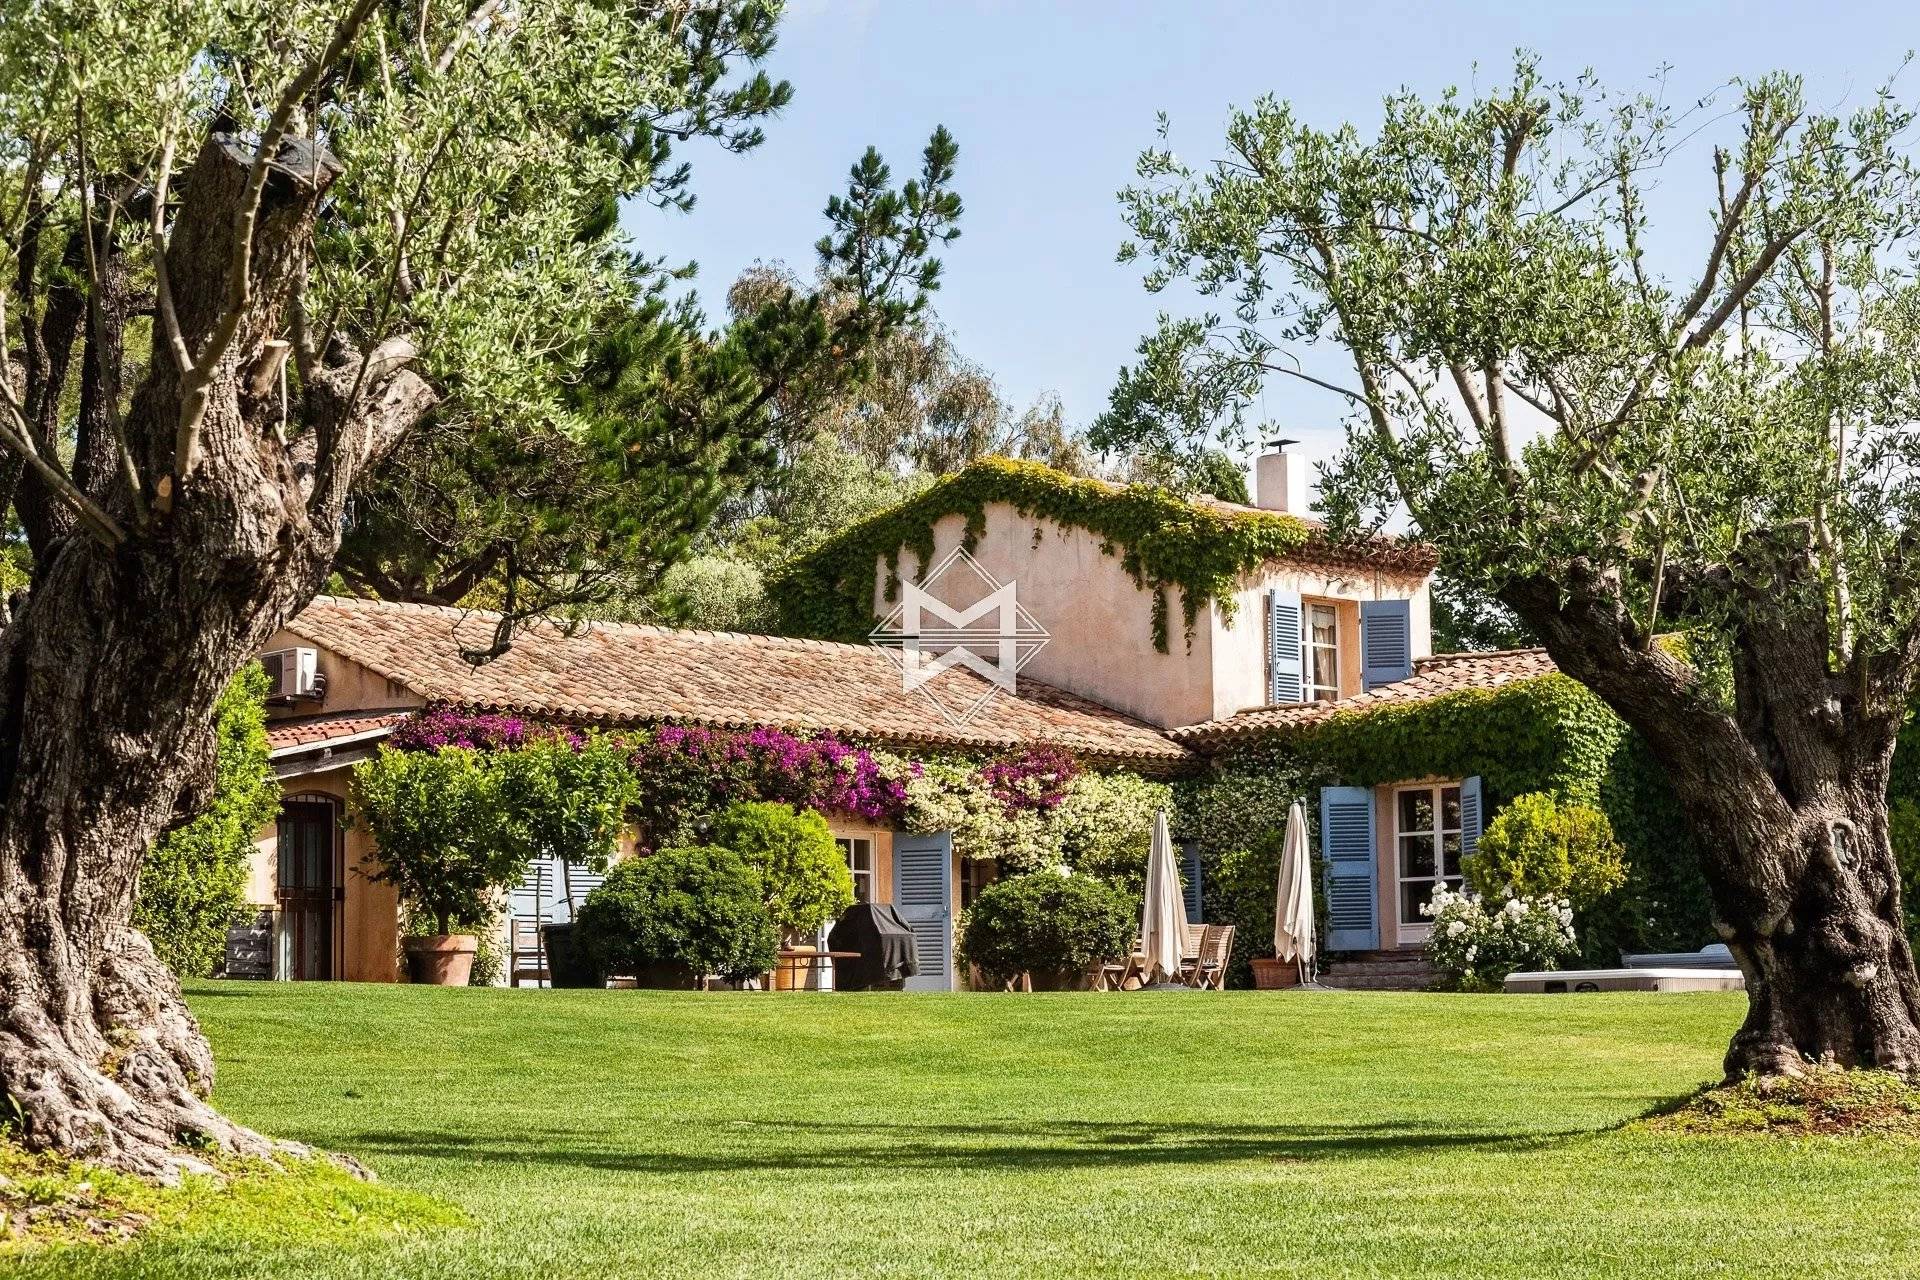 Provencal property in the heart of an exceptional natural setting